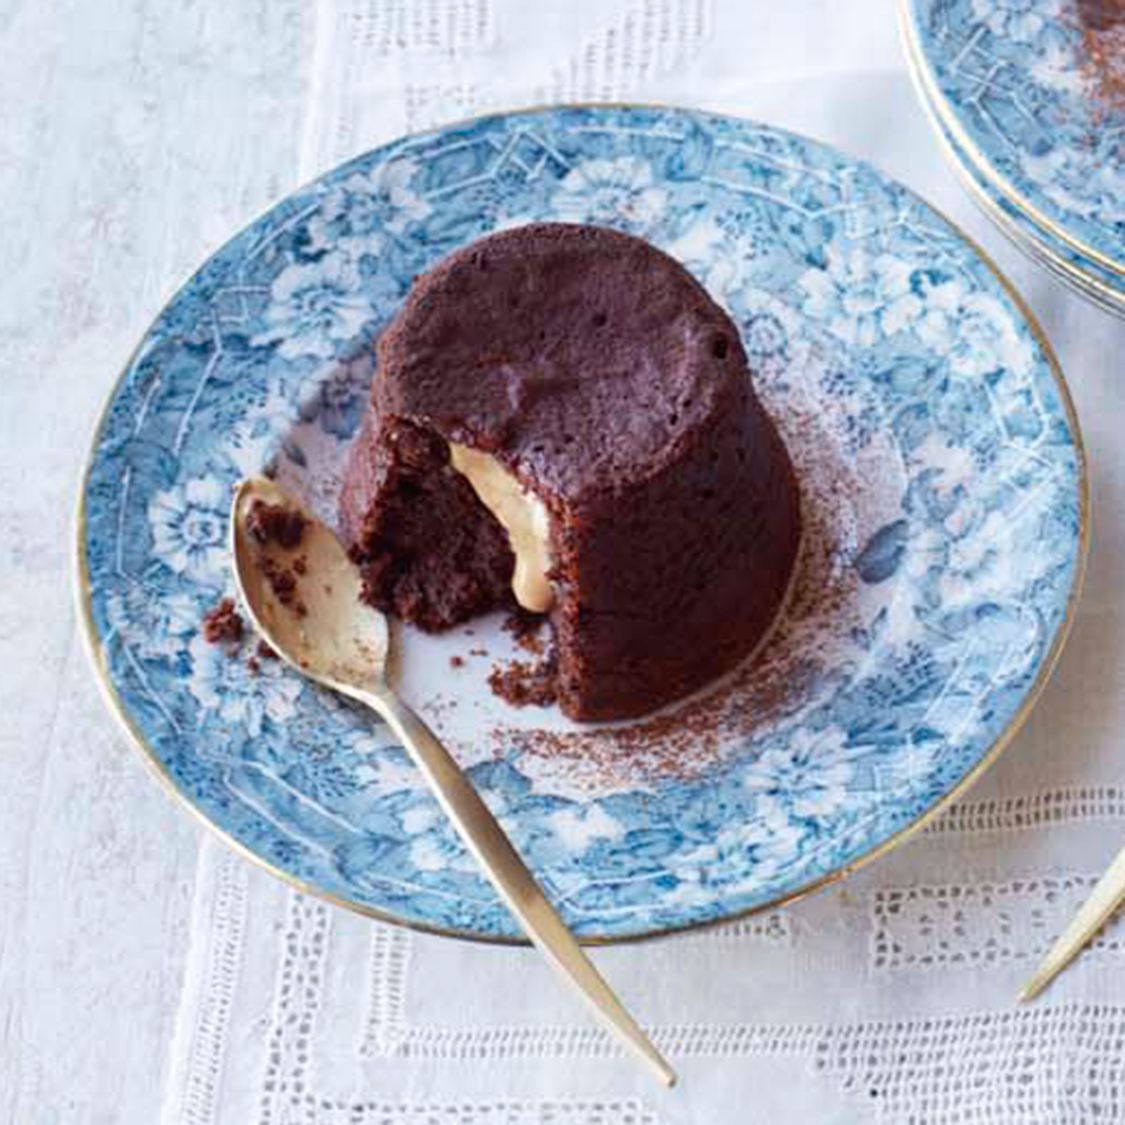 Prue Leith's Double Chocolate Fondant Puddings - The Great British